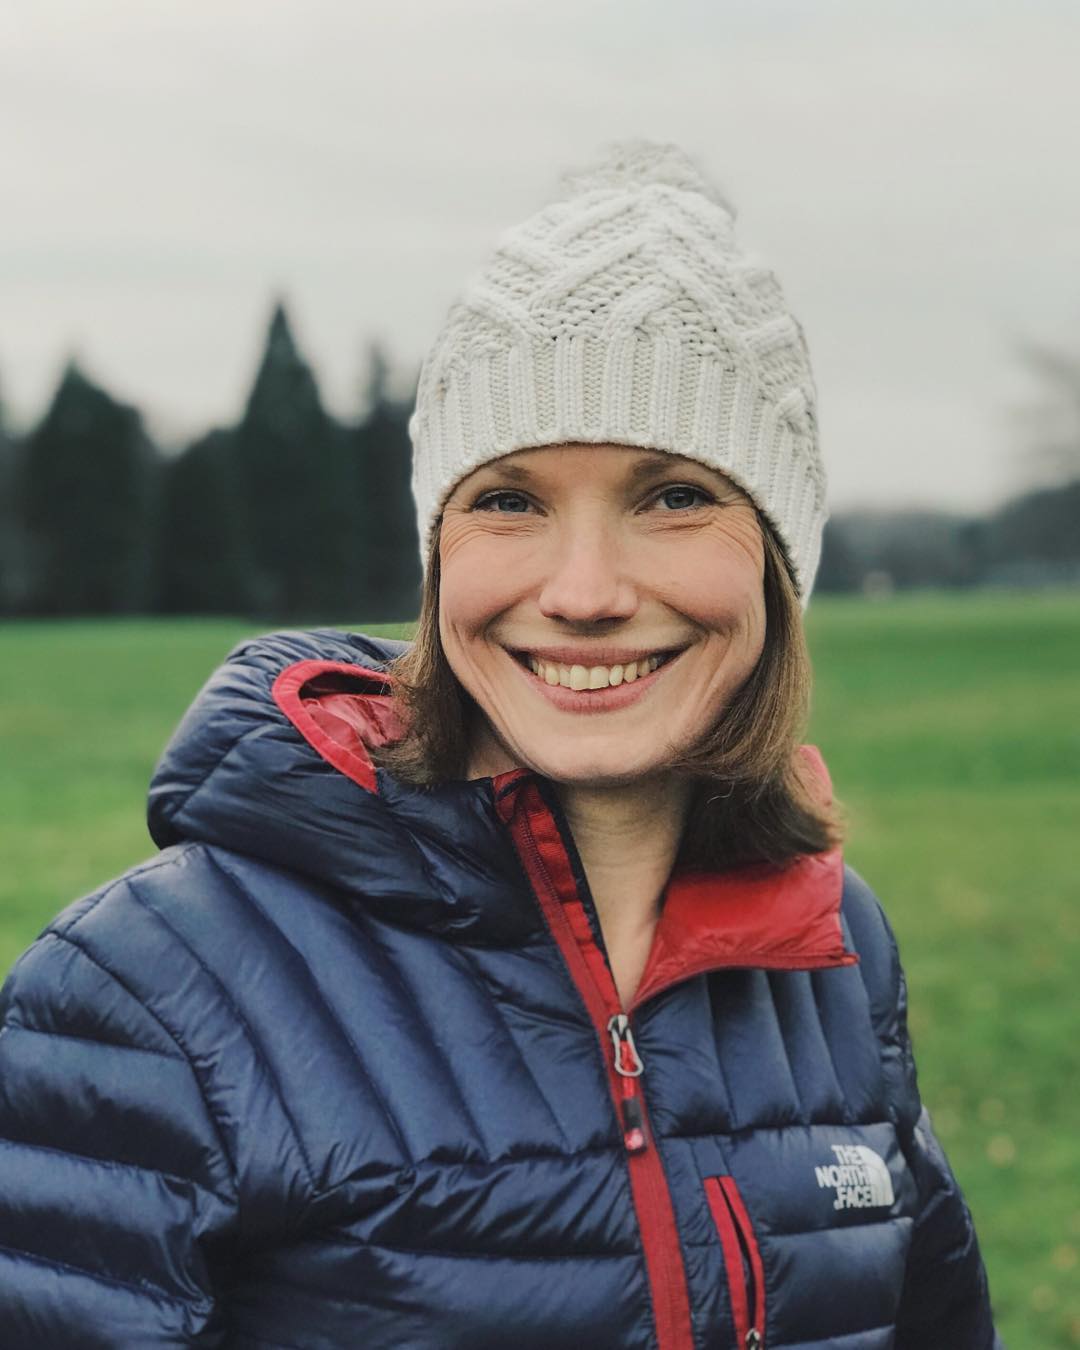 A woman smiling wearing a white bobble hat and a blue and red down jacket